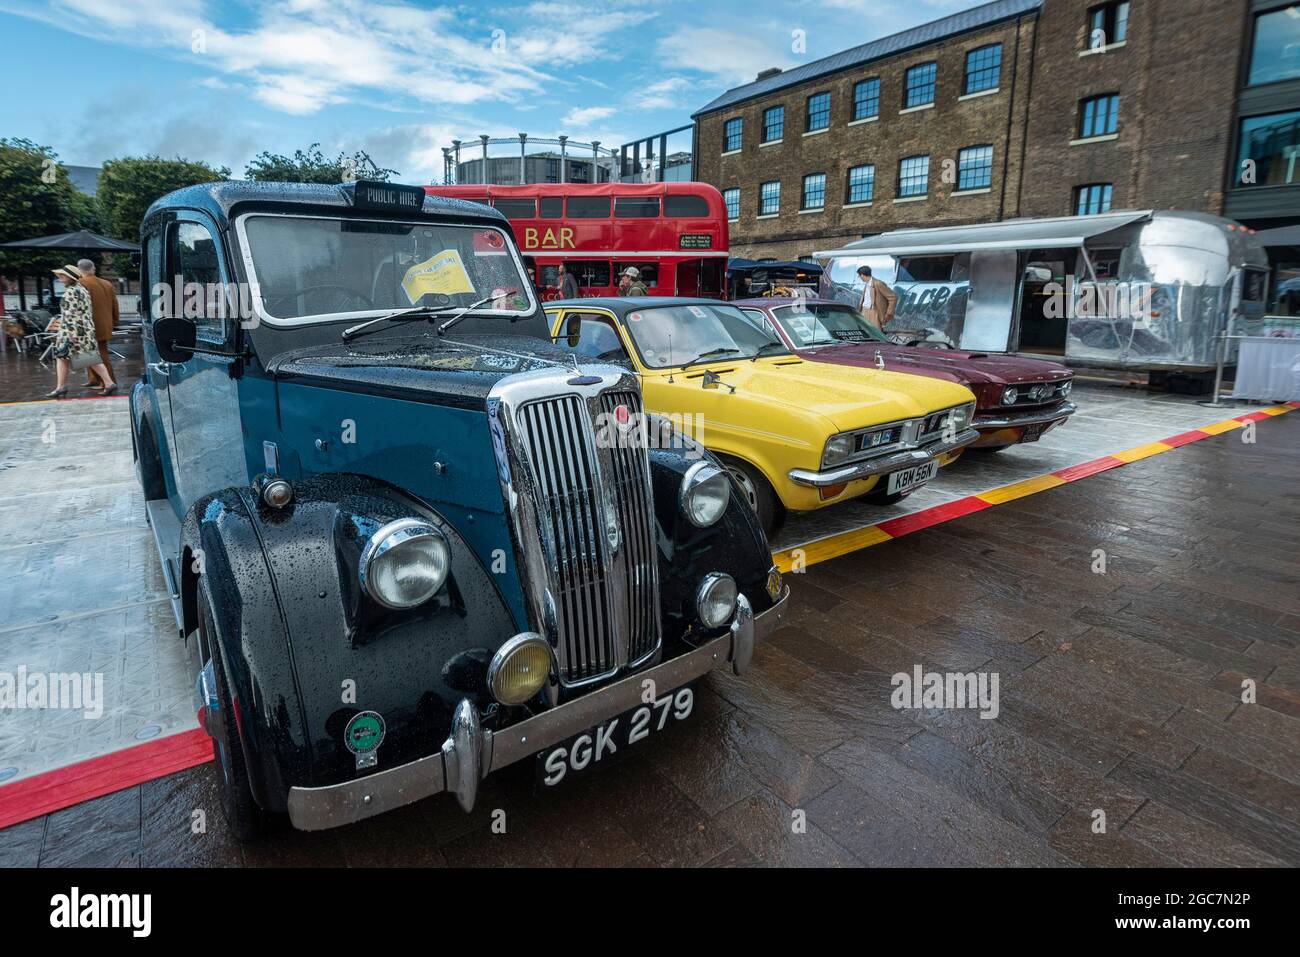 London, UK.  7 August 2021. Vintage cars on show at the Classic Car Boot Sale in Granary Square, King’s Cross.  The event celebrates all things vintage from fashion and jewellery to homeware and vinyl records.  Over 100 vintage vehicles are also on display.  Credit: Stephen Chung / Alamy Live News Stock Photo